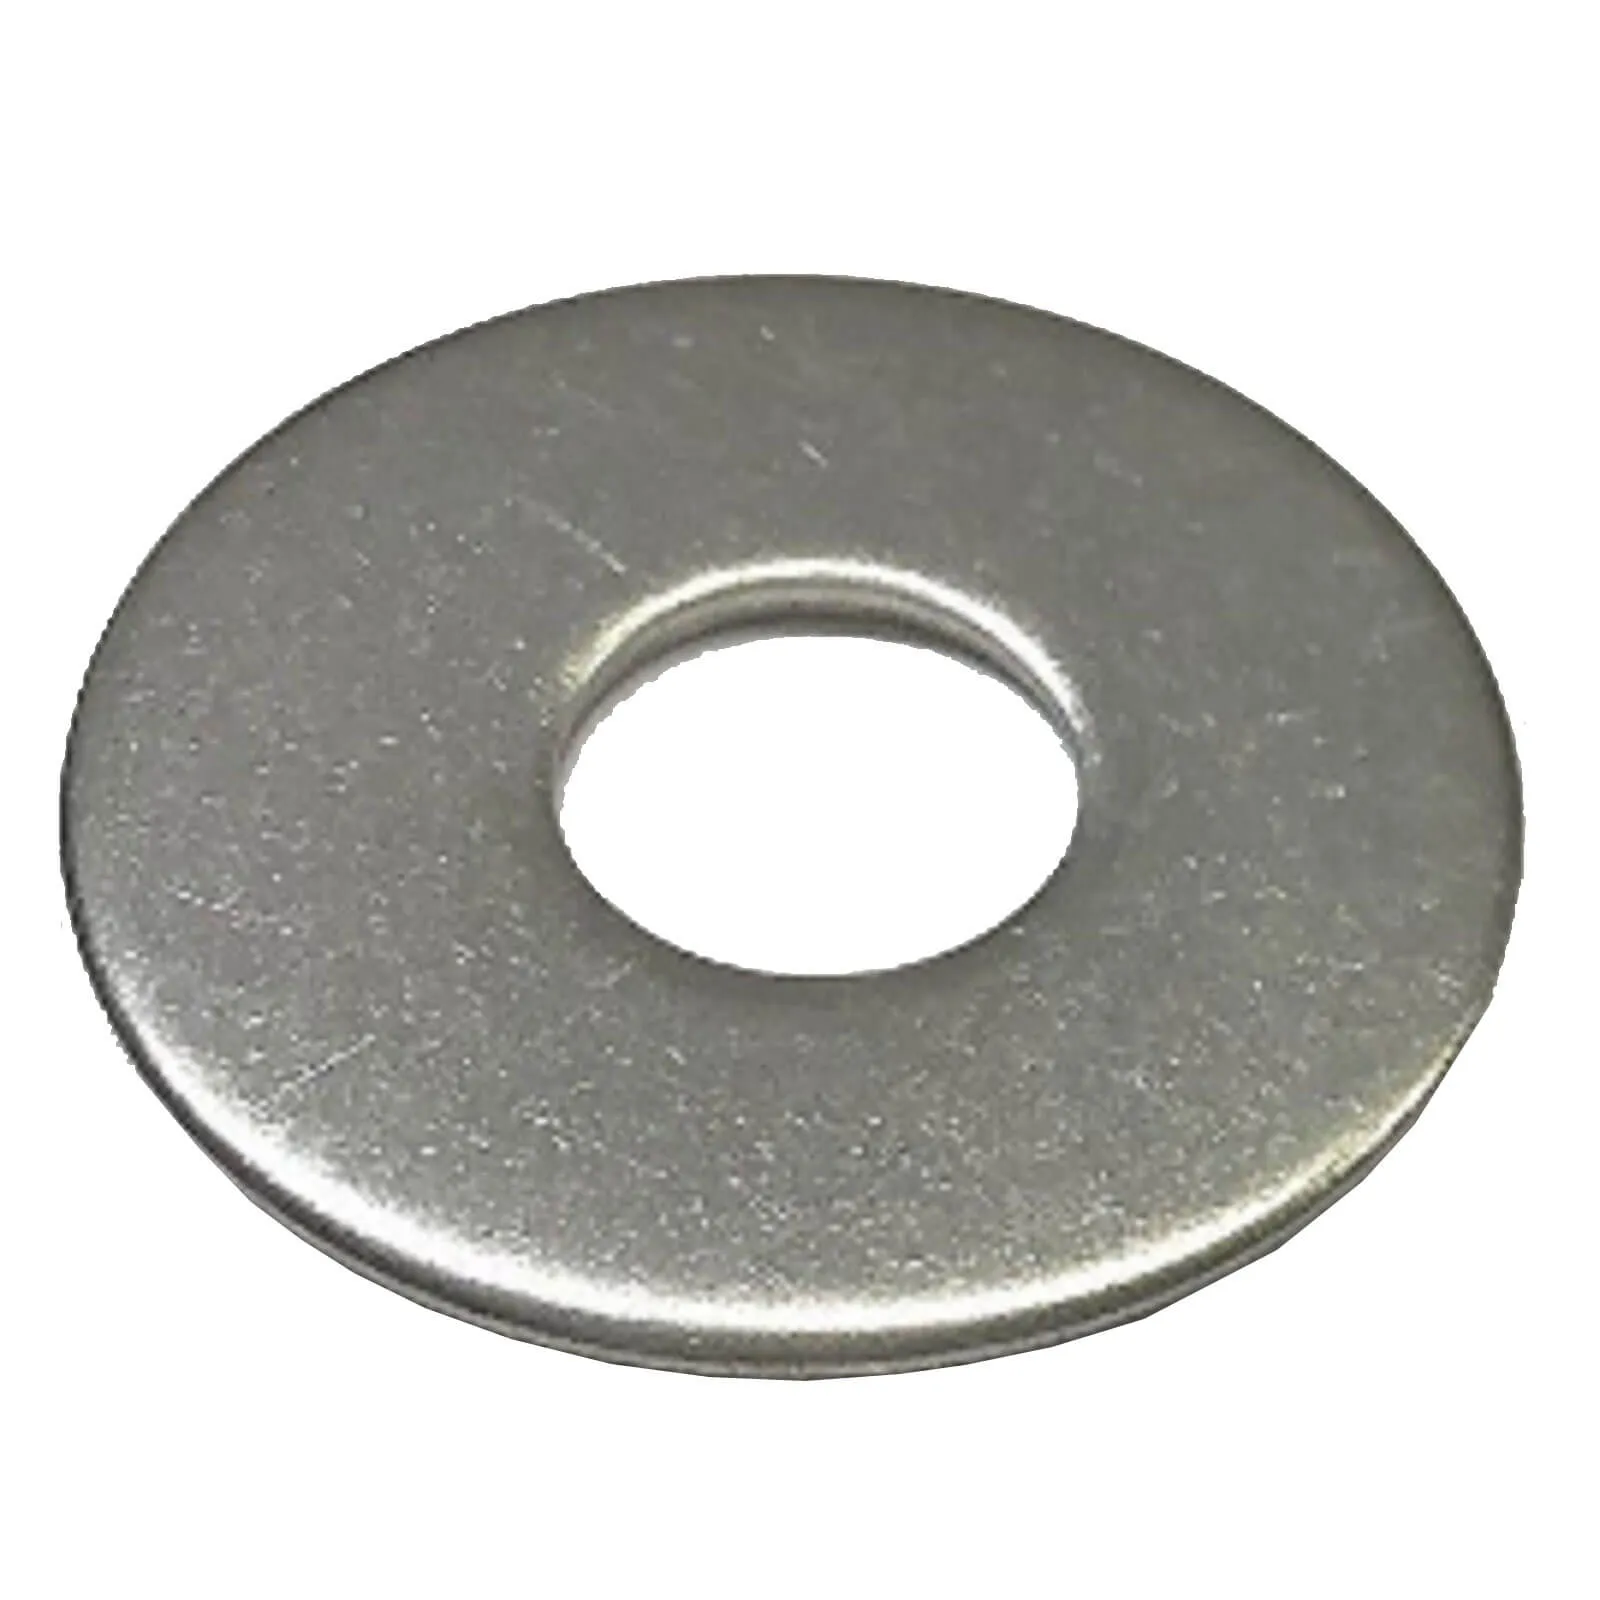 Penny Repair Washers Zinc Plated - 8mm, 25mm, Pack of 3500